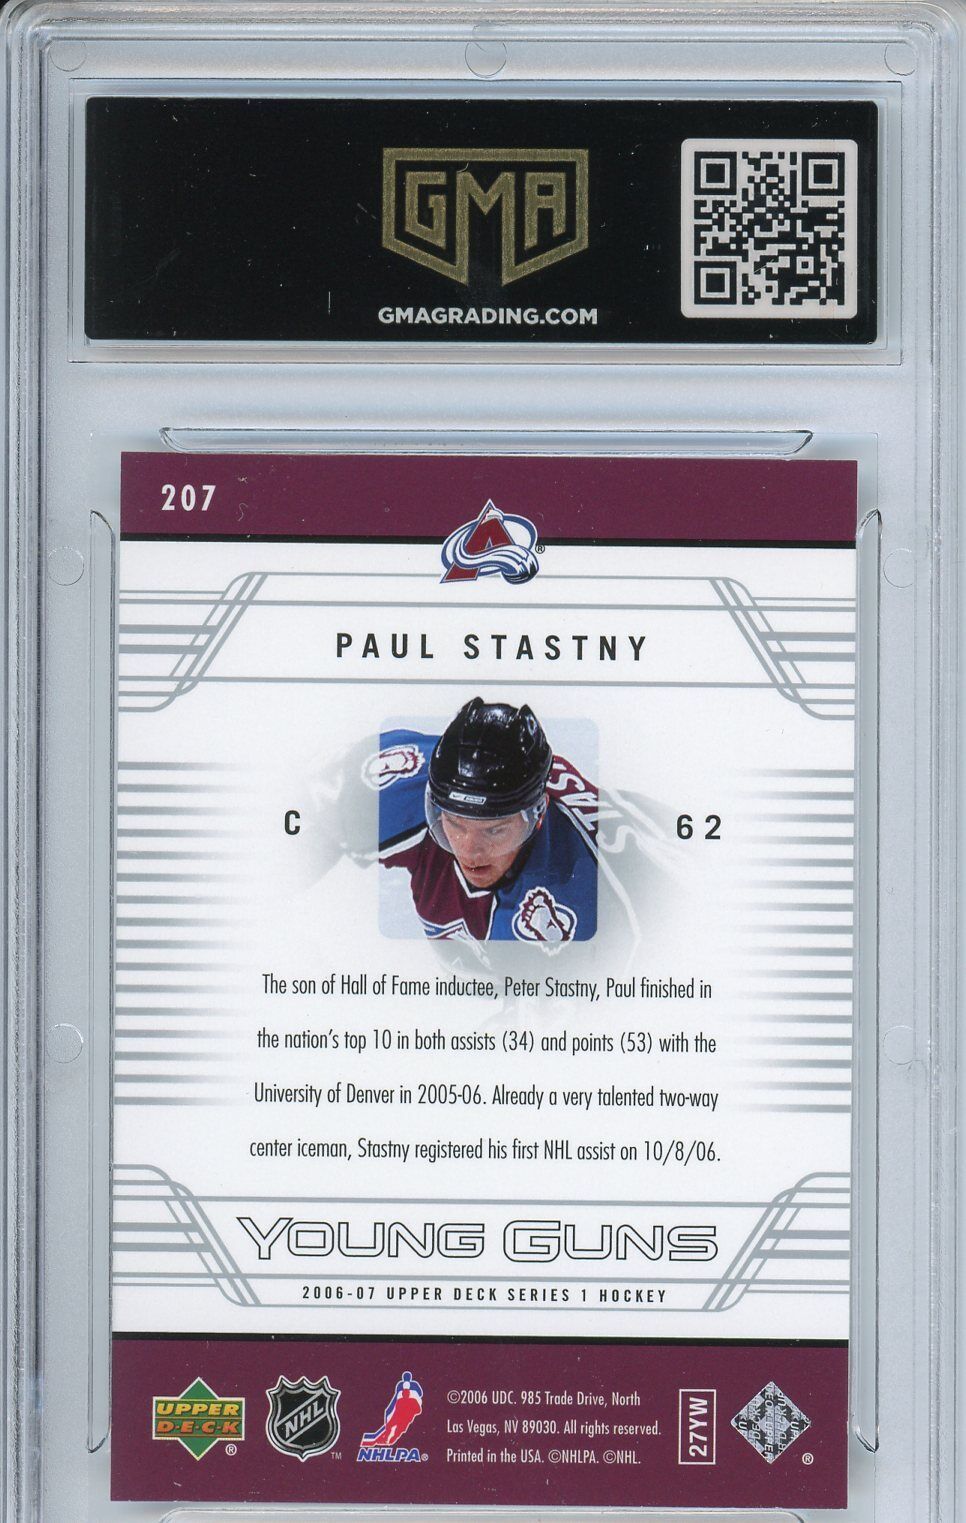 2008 Upper Deck Paul Stastny #207 Young Guns Rookie GMA 10